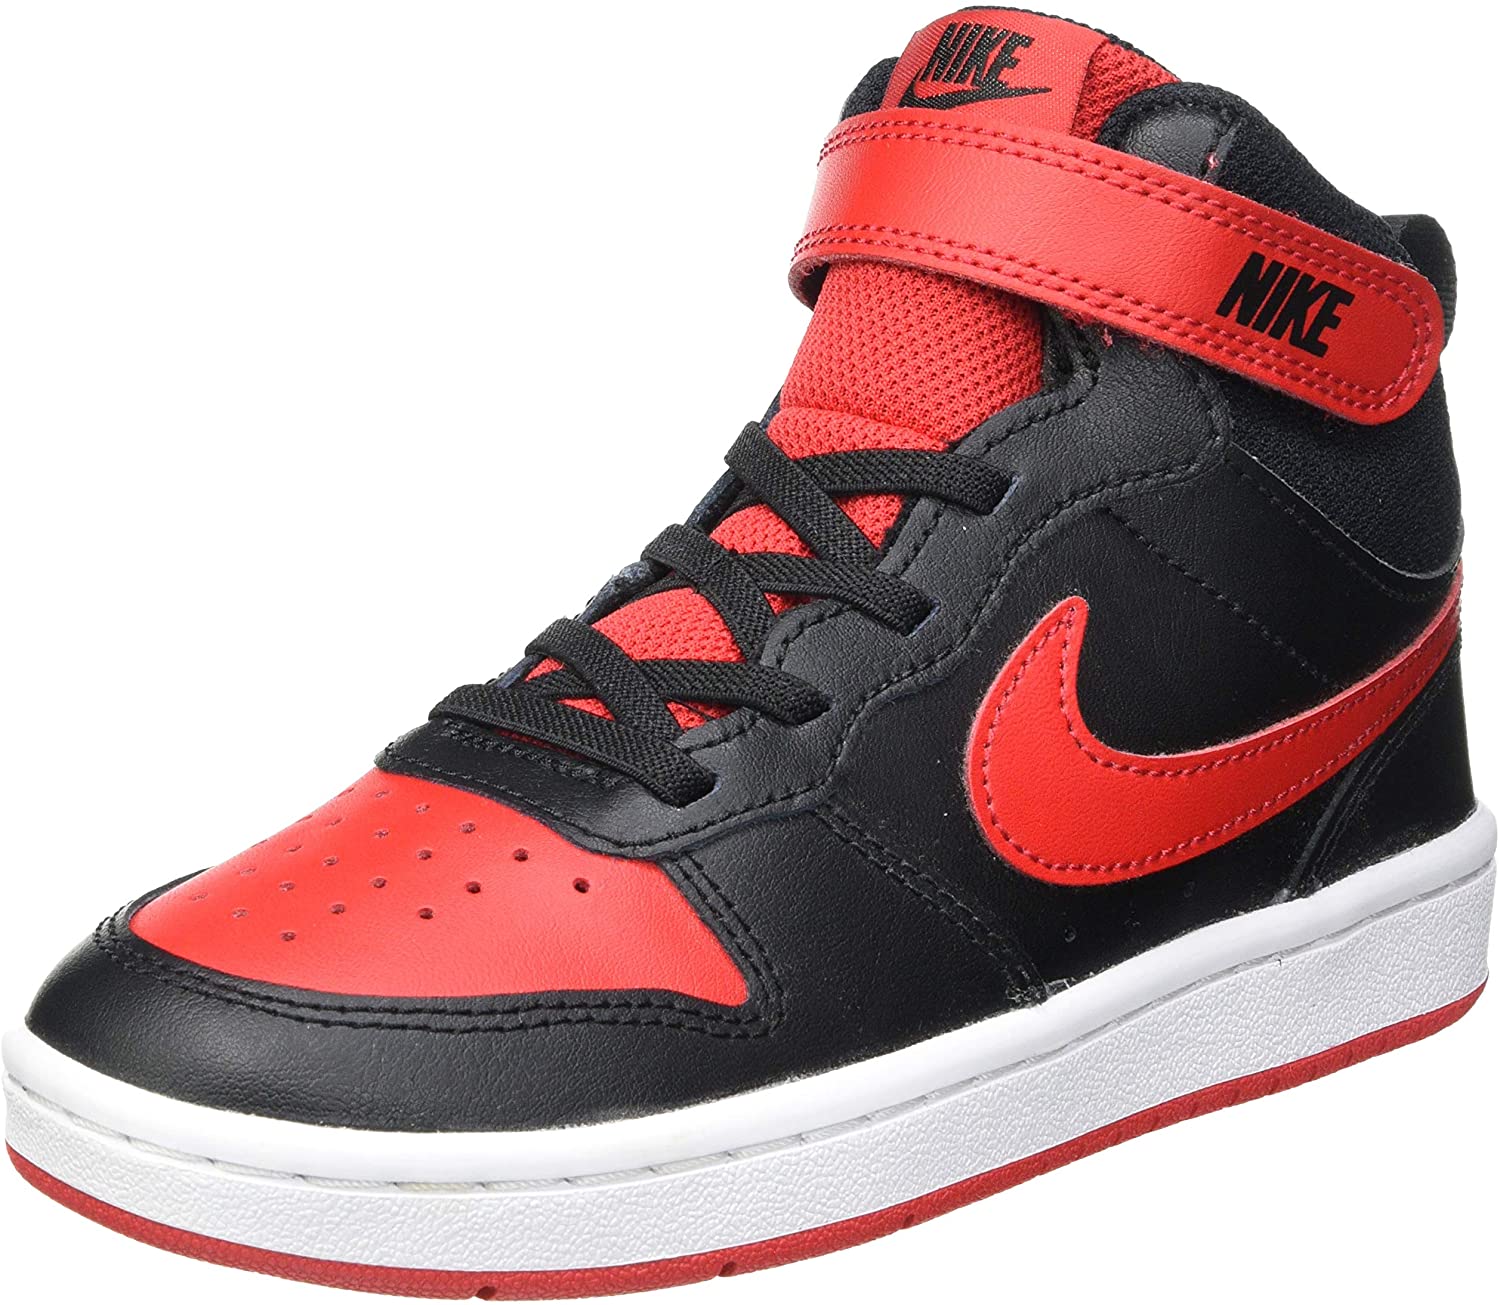 Nike Court Borough 2 Leather Sneakers Athletic Shoes 12 Black/Red -